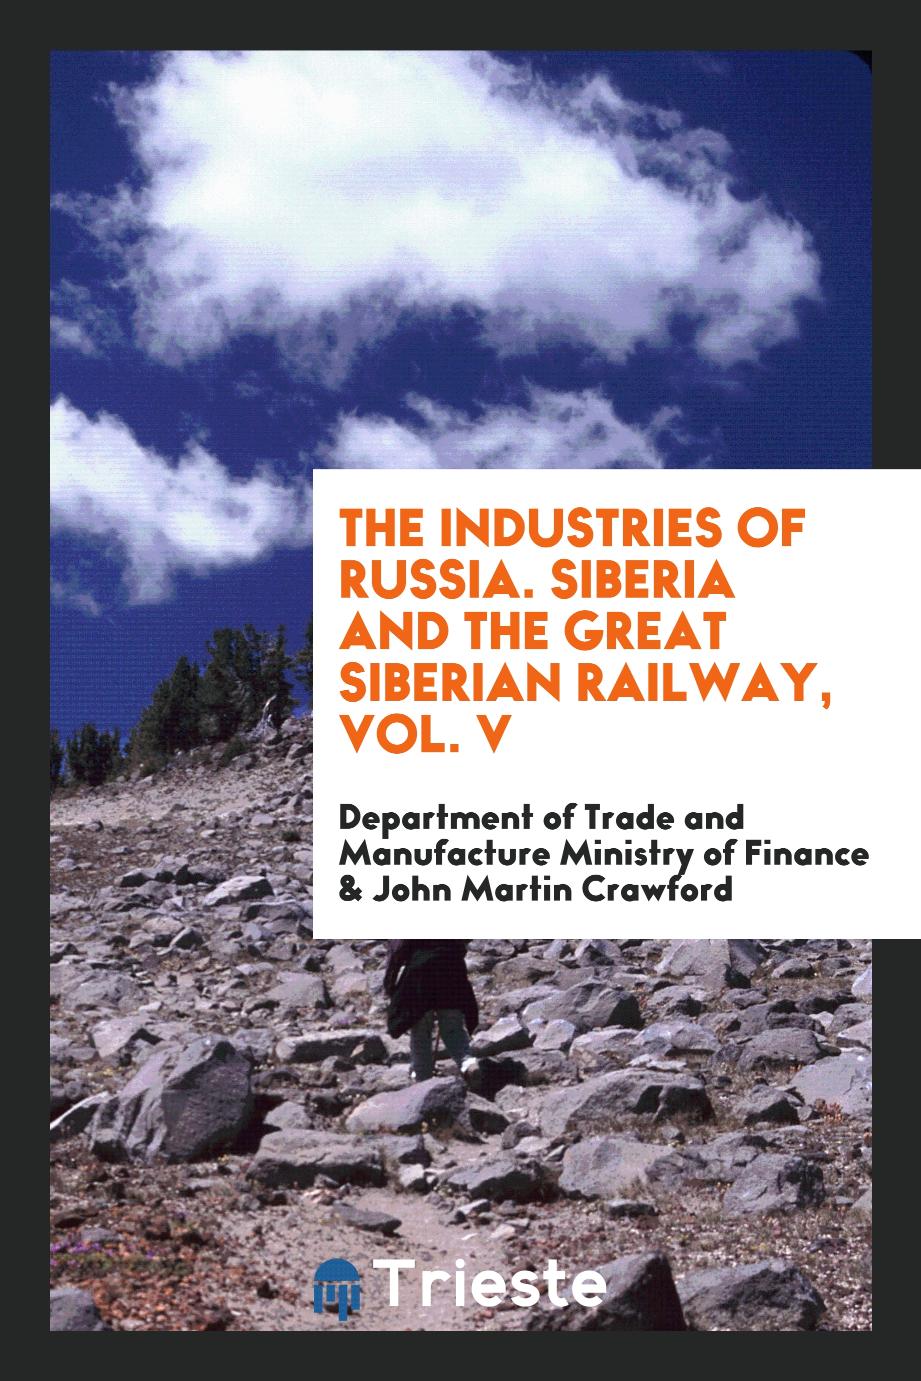 The Industries of Russia. Siberia and the Great Siberian Railway, Vol. V